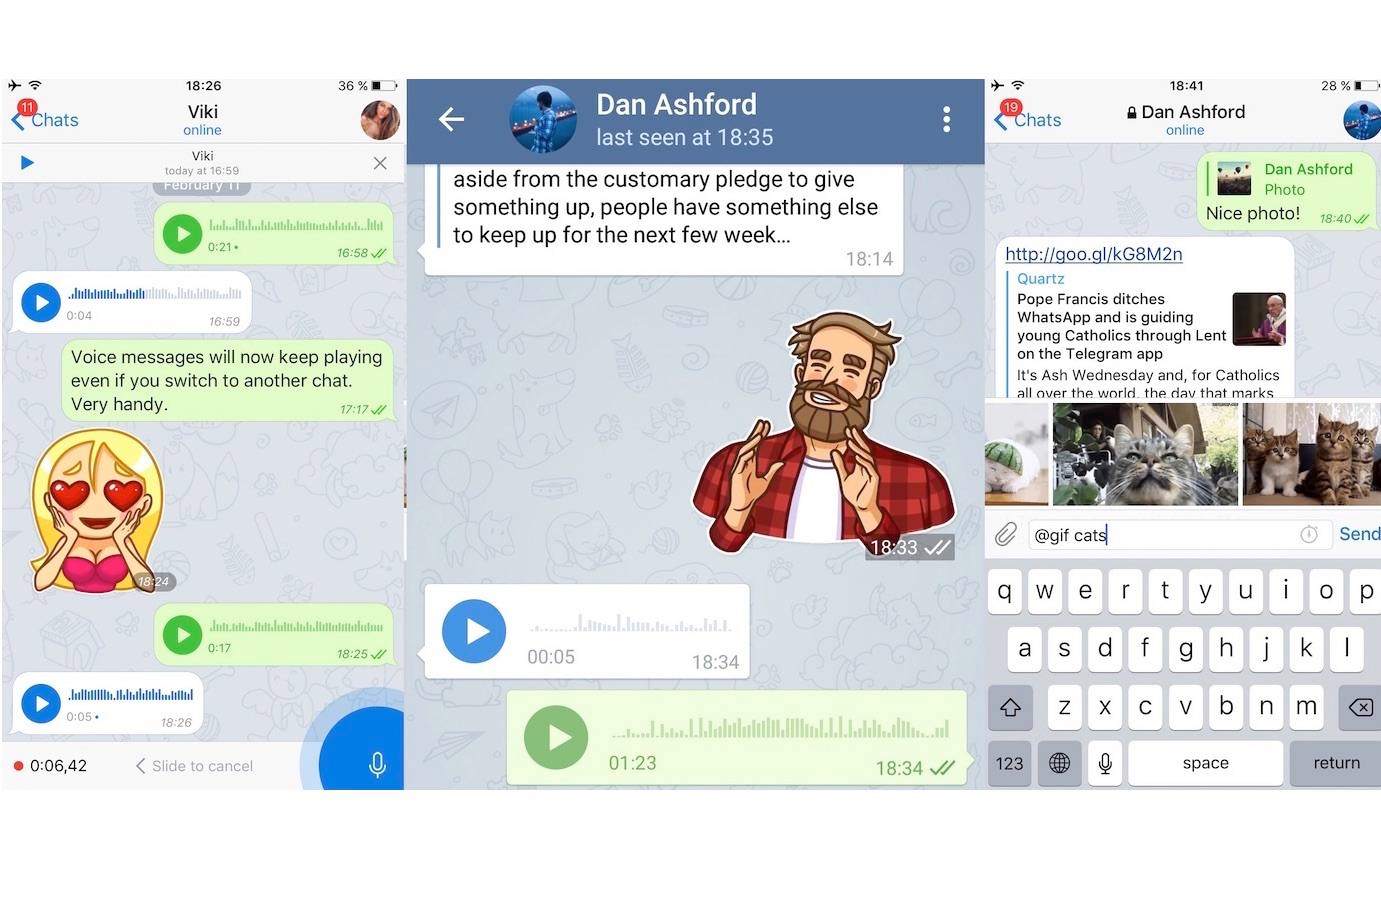 Telegram - Check Out How to Use the Fastest Messaging App on the Market